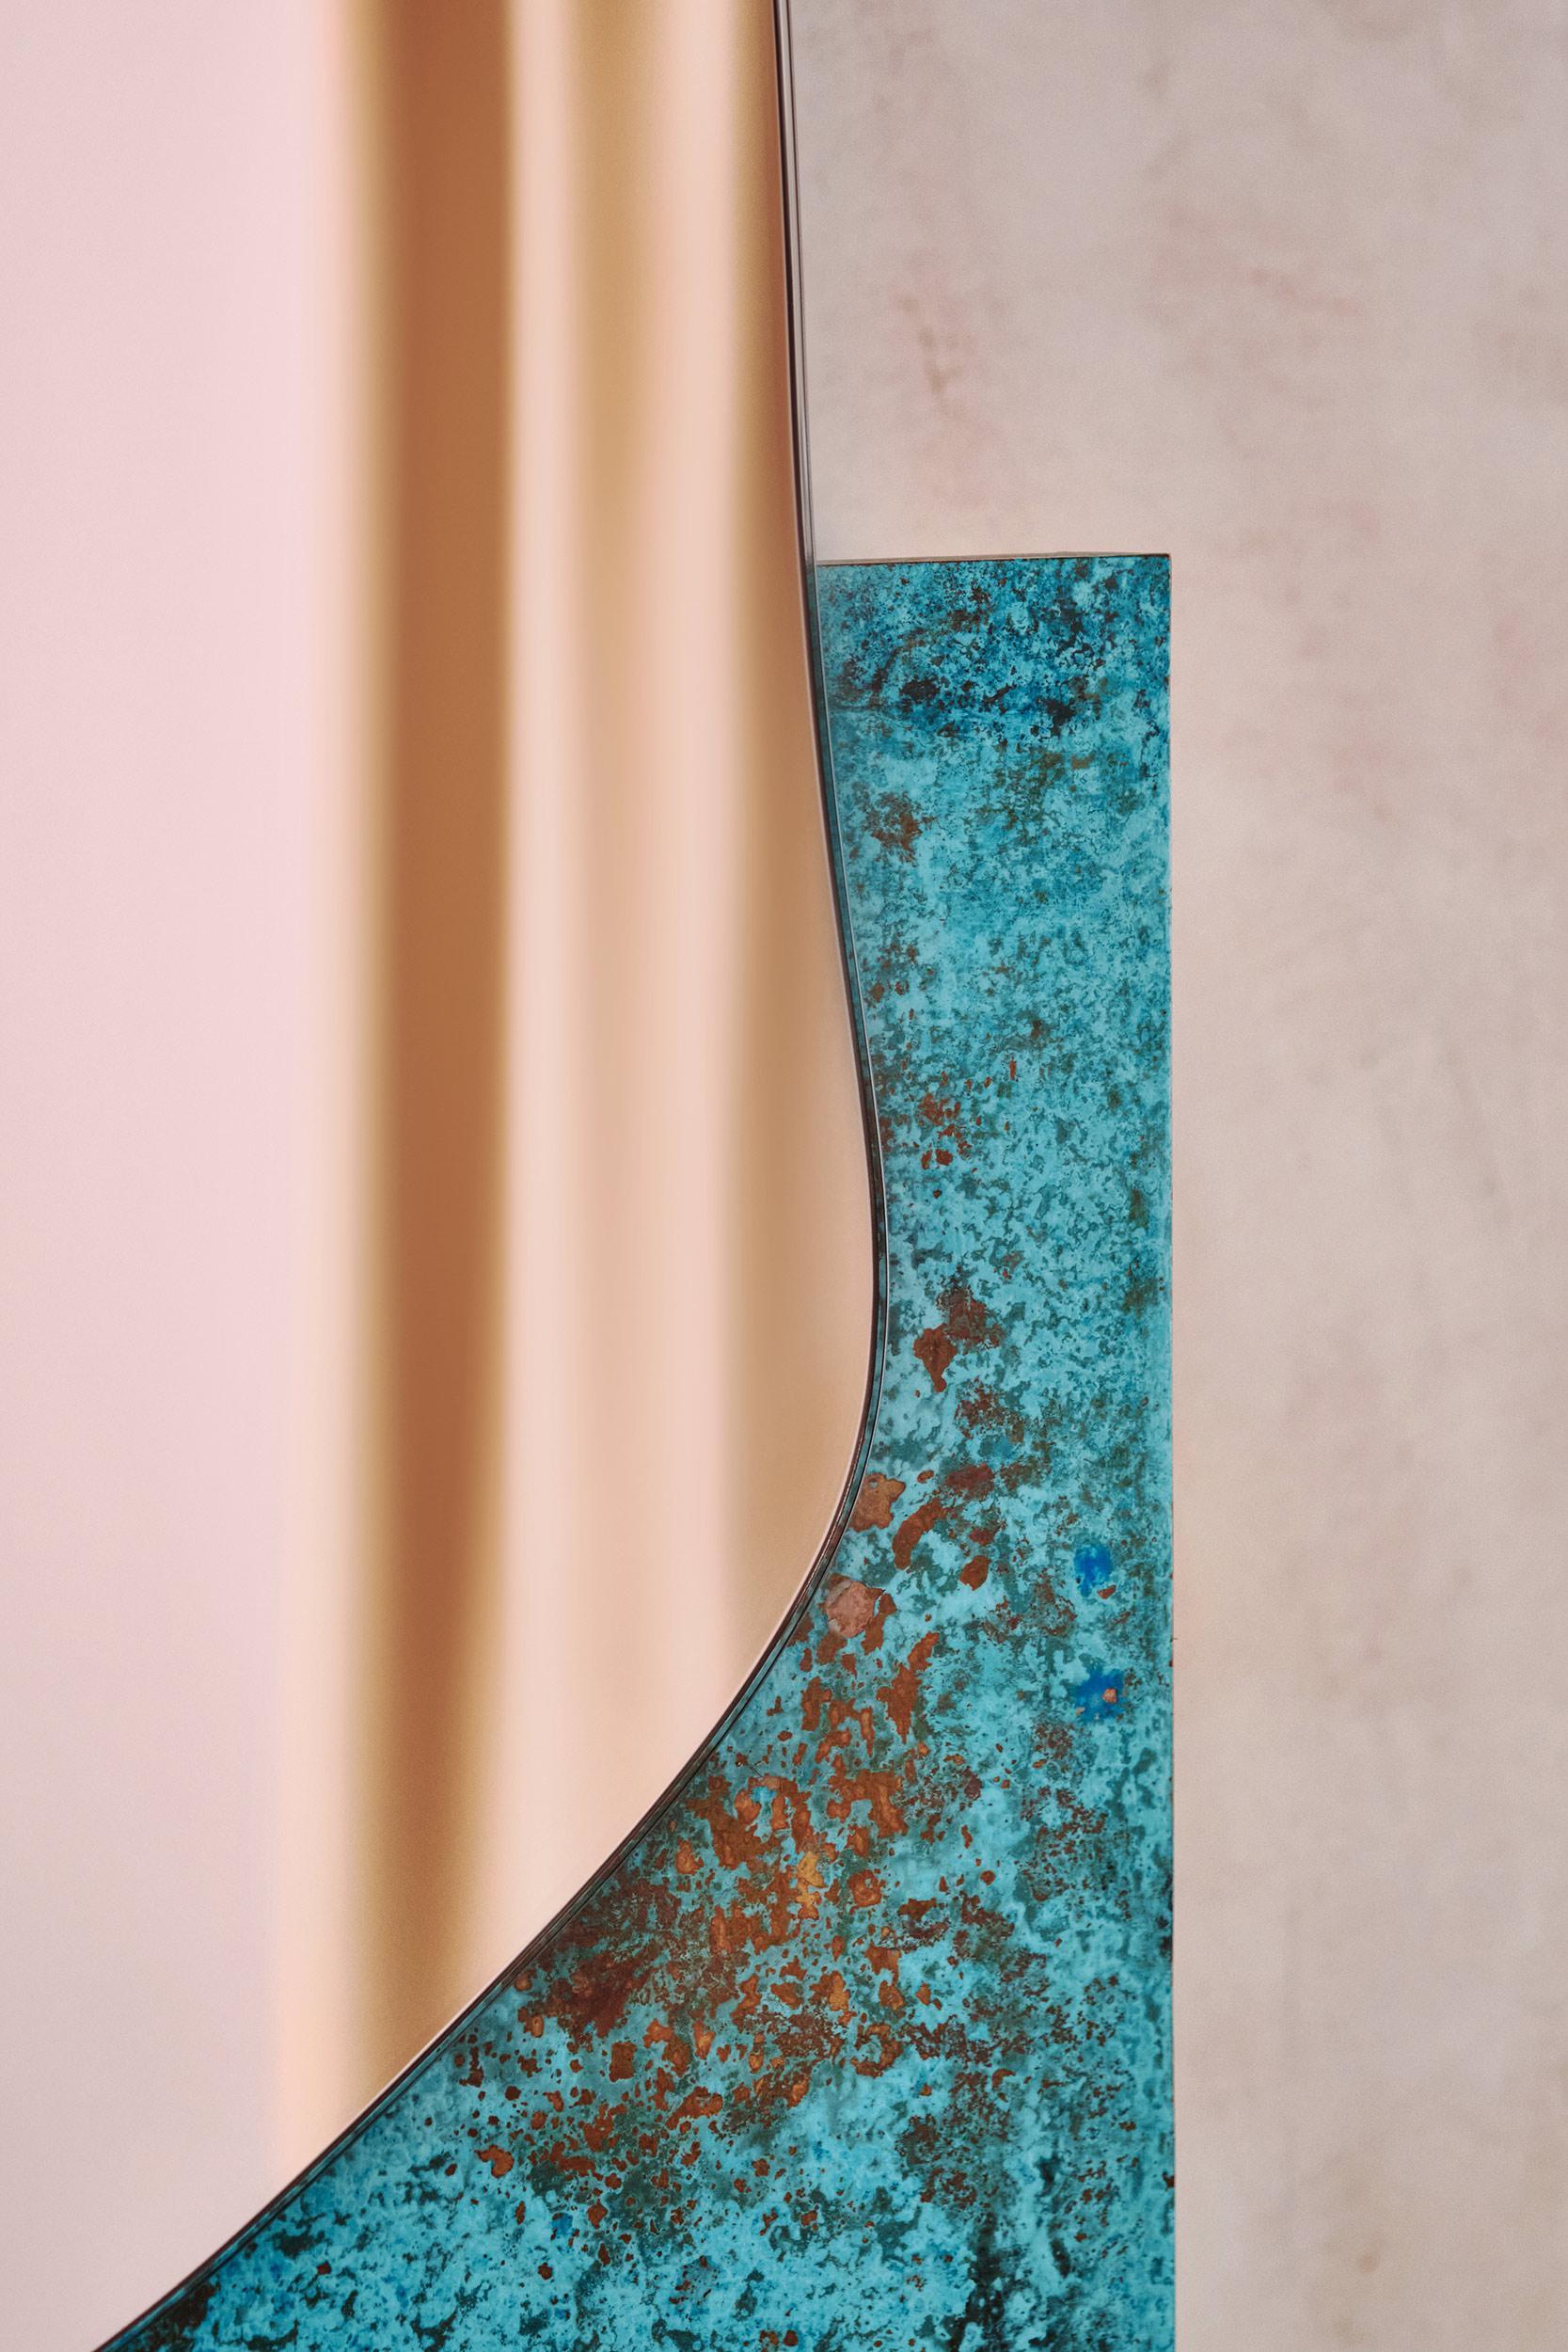 Contemporary Wall Mirror 'Lake 3' by Noom, White Marble and Copper Tint In New Condition For Sale In Paris, FR